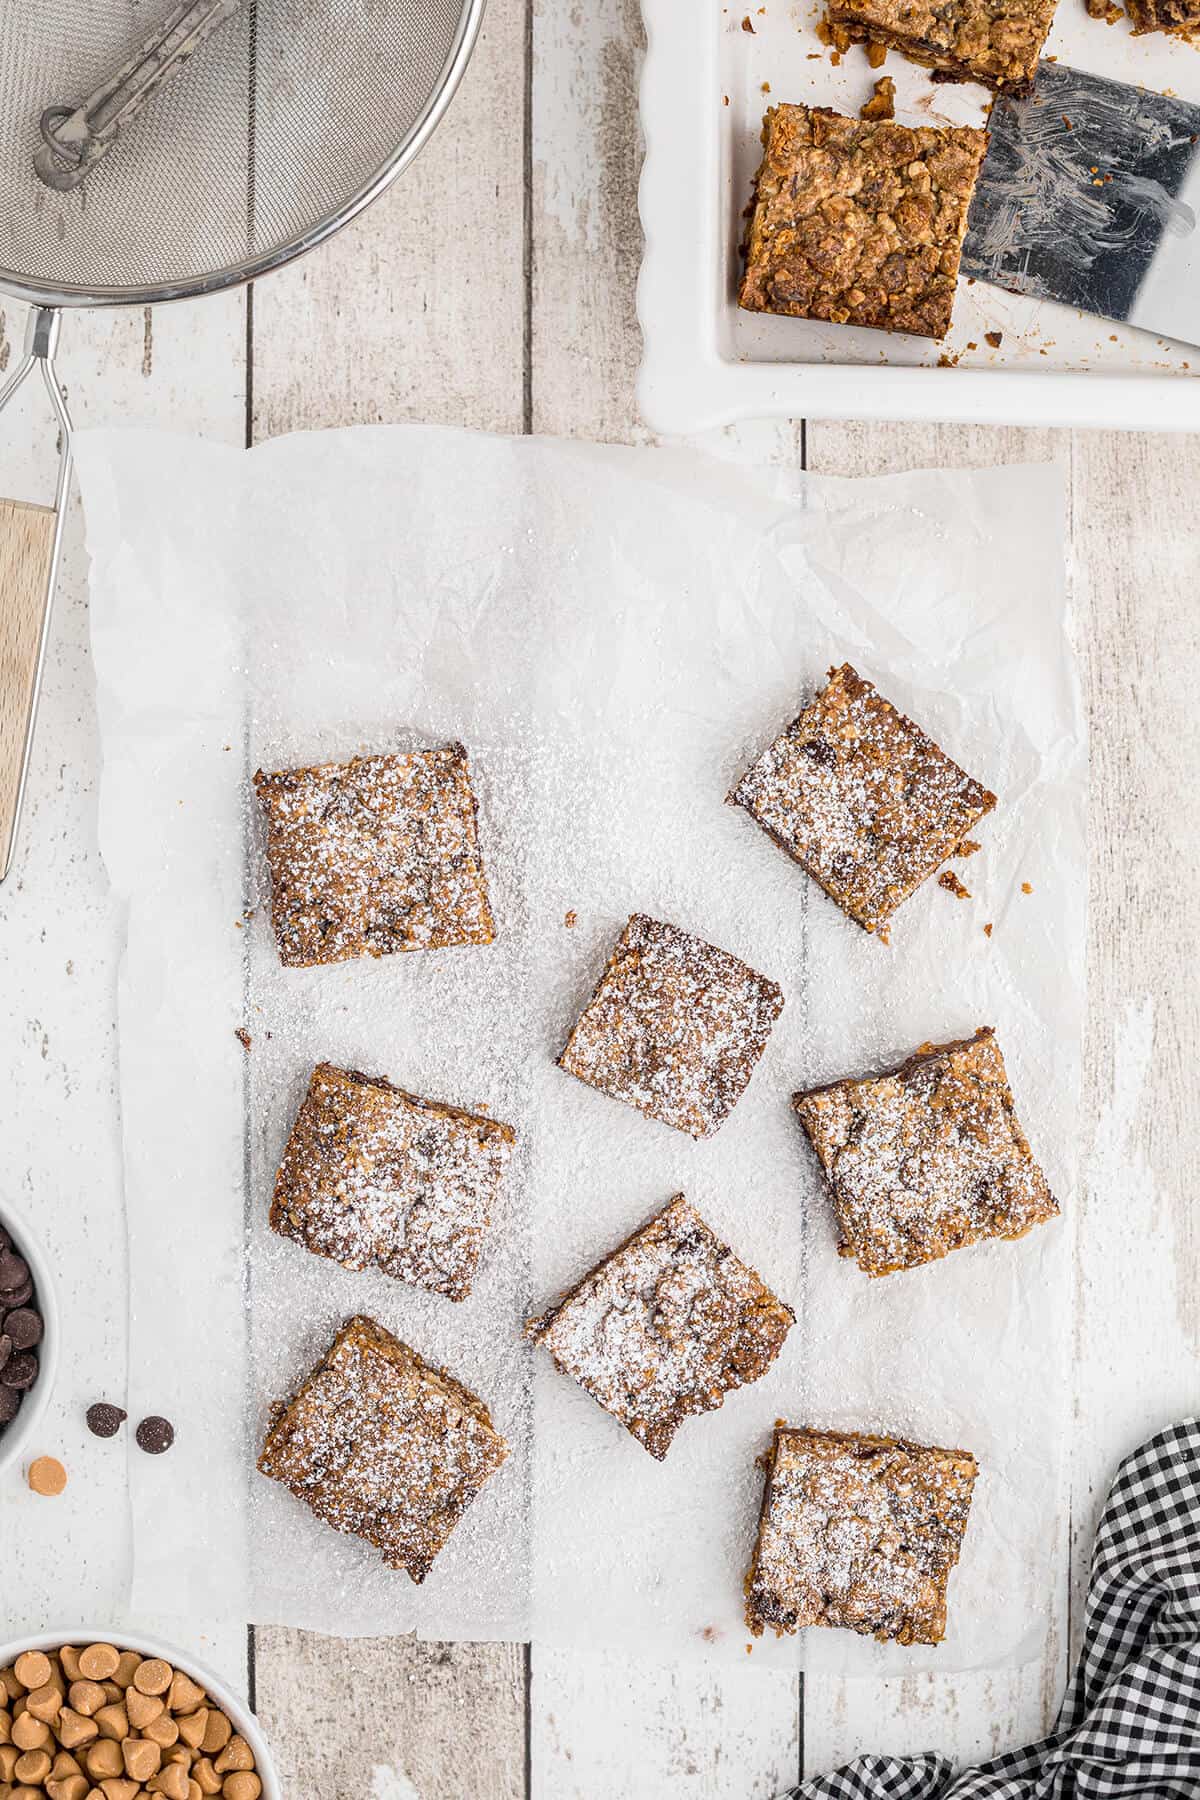 Cookies cut into squares and dusted with powdered sugar.